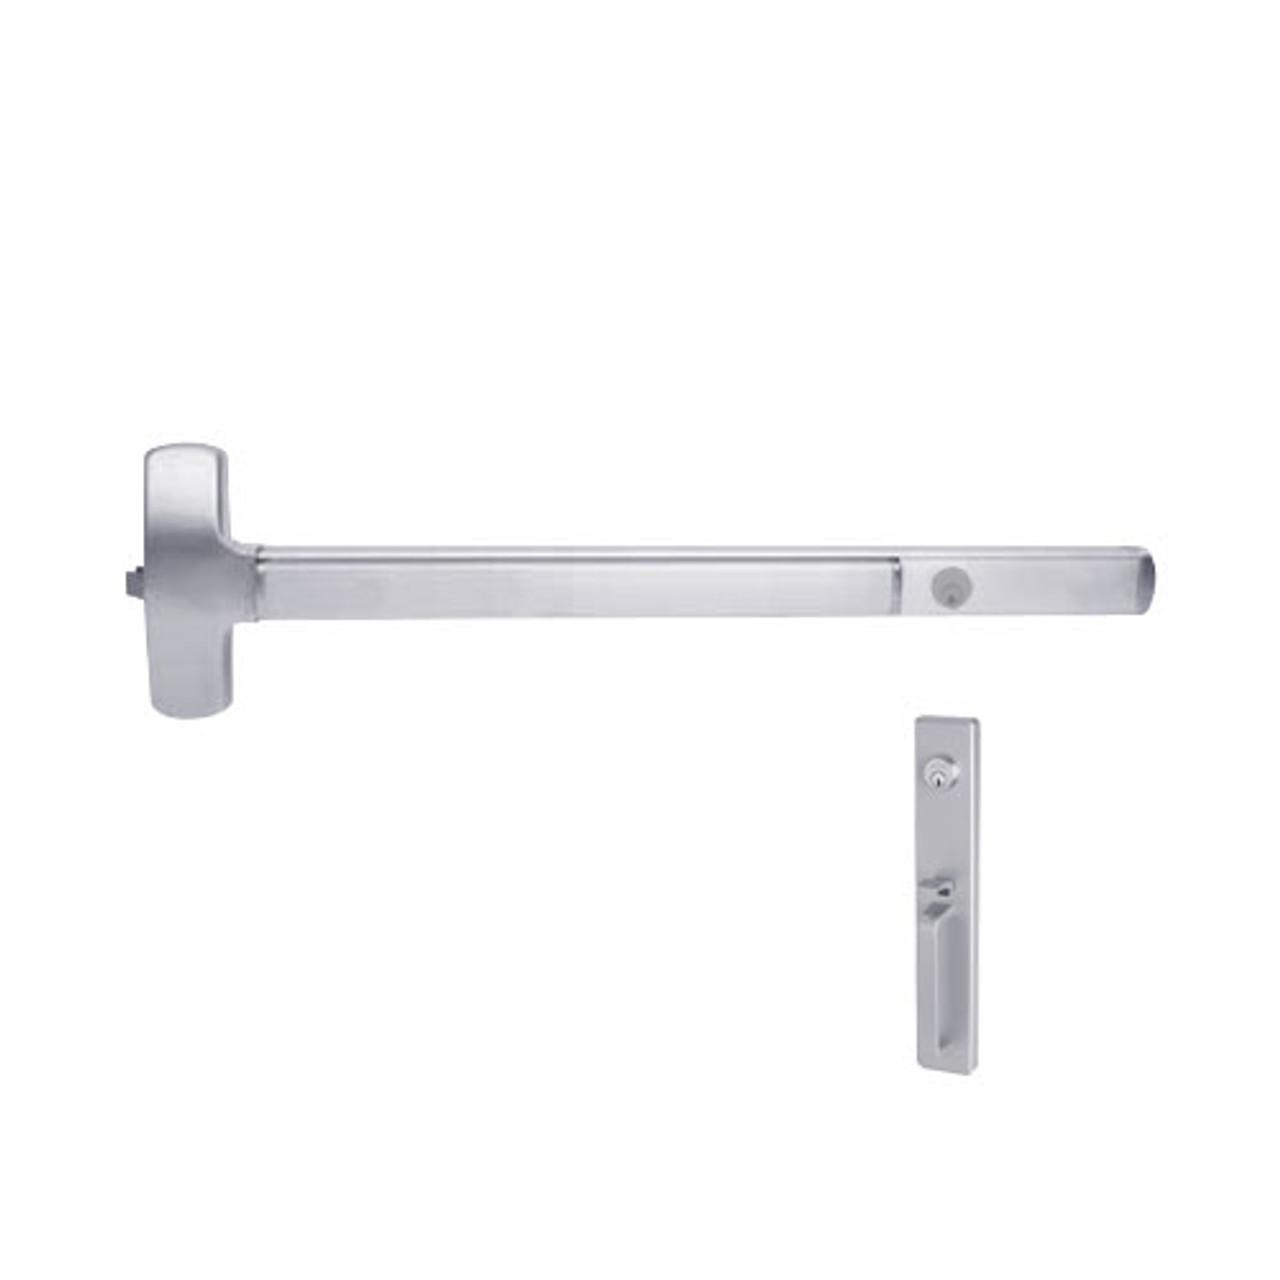 CD25-R-TP-US26-4 Falcon Exit Device in Polished Chrome